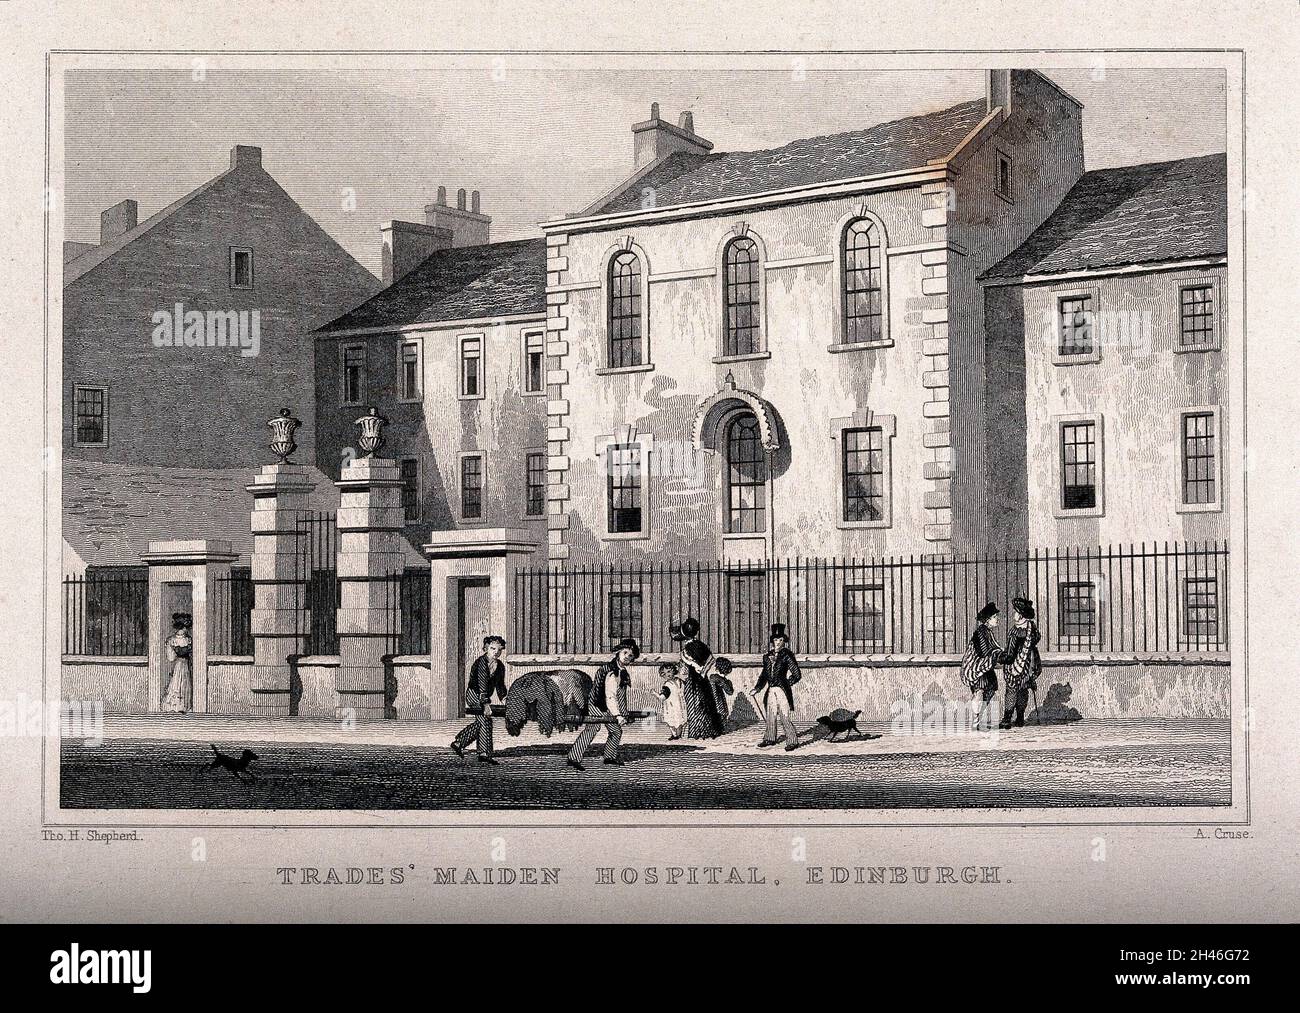 Figures standing outside the Trades' Maiden Hospital, Edinburgh, Scotland. Line engraving by A. Cruse after T.H. Shepherd. Stock Photo